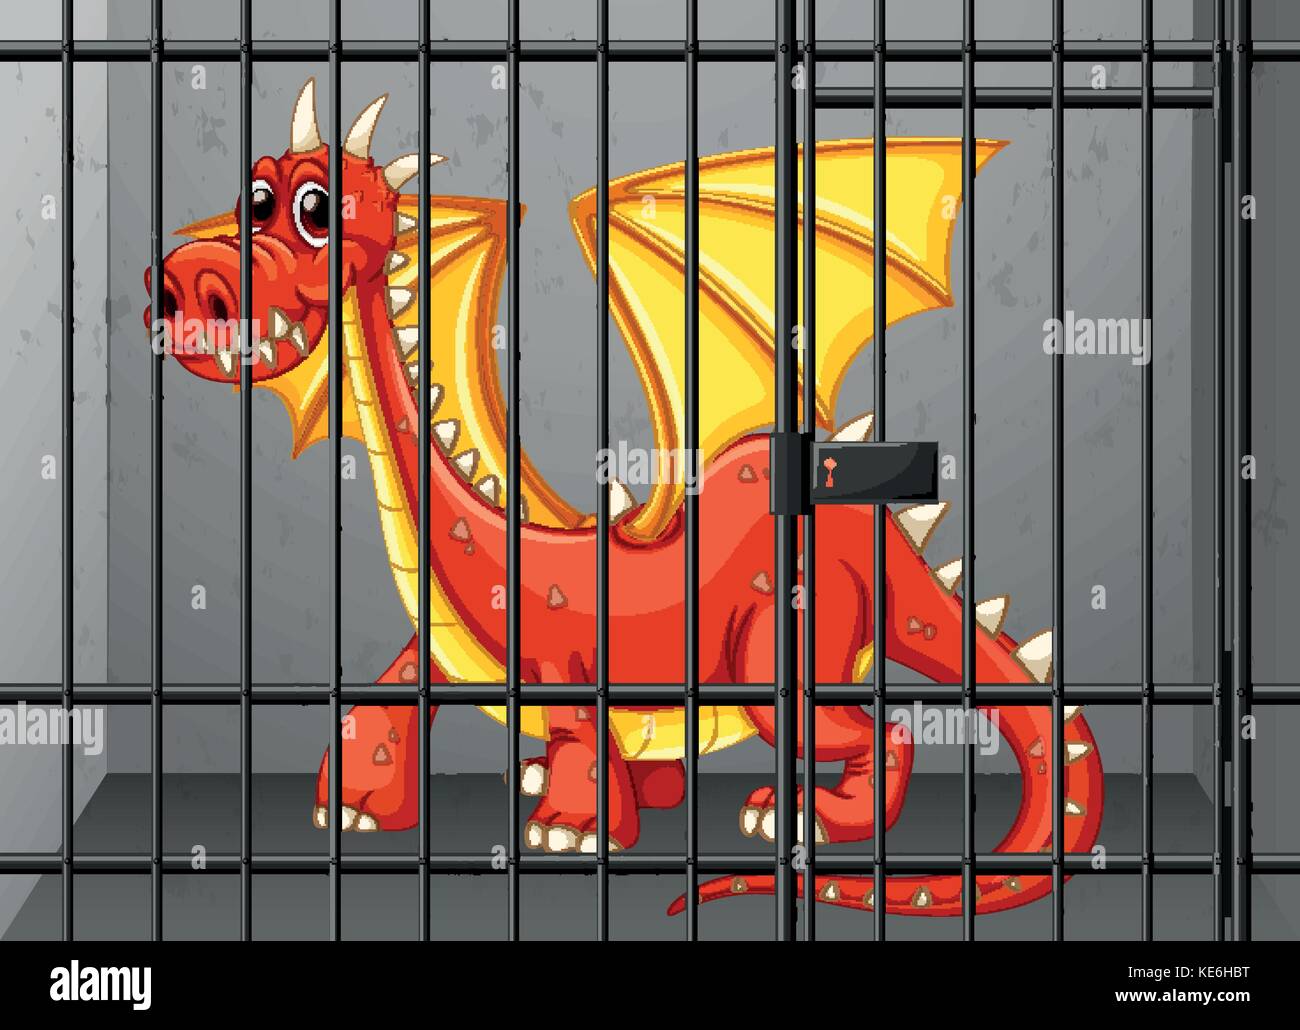 Monster In Locked Cage Stock Photos & Monster In Locked Cage Stock ...